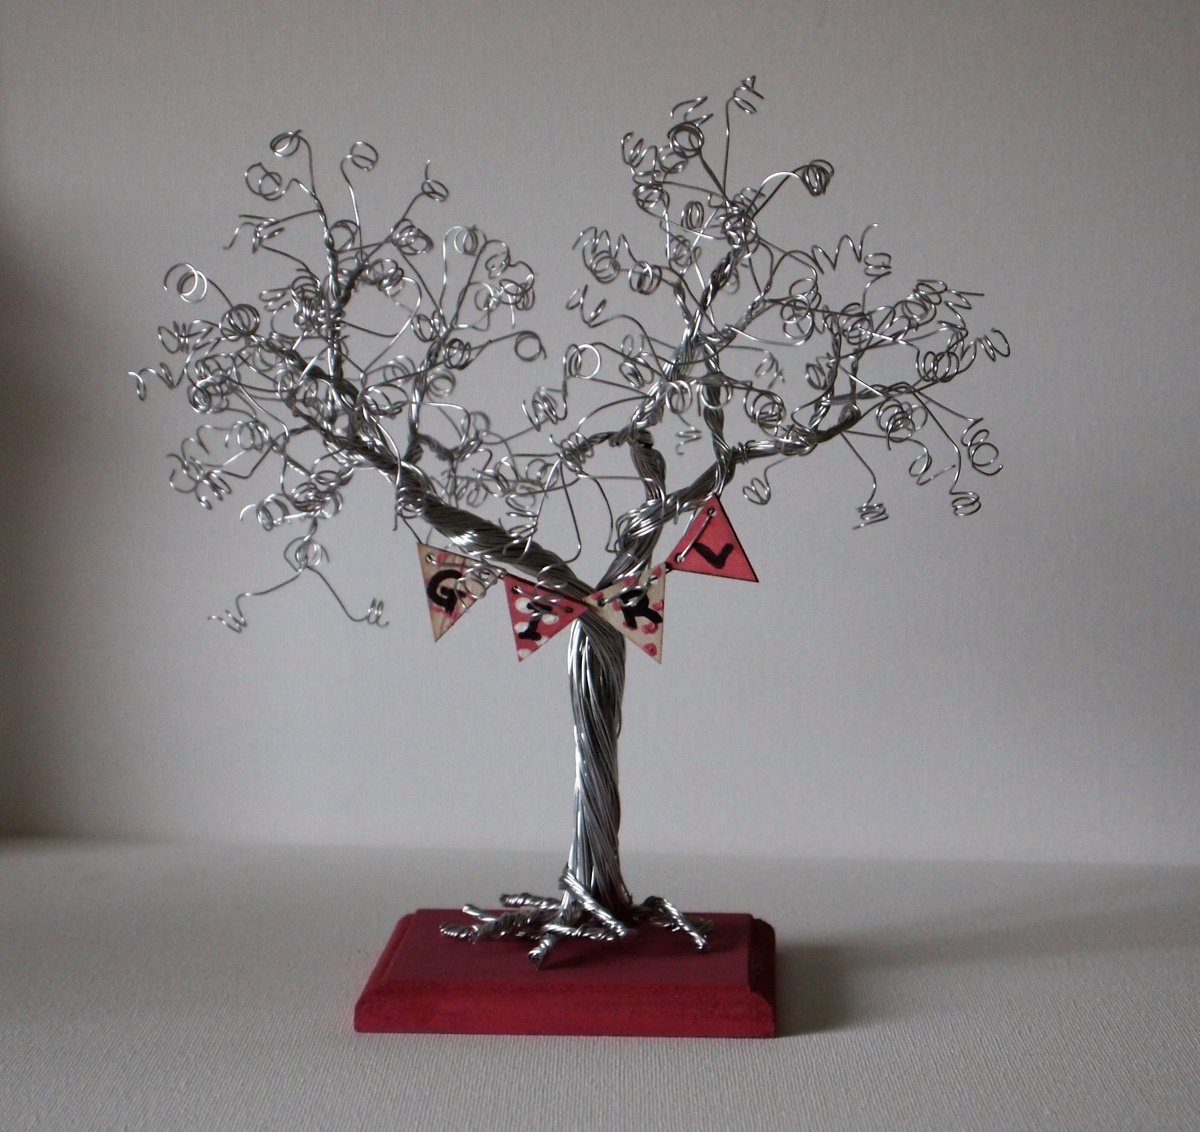 It’s a GIRL tree by Steph Morgan